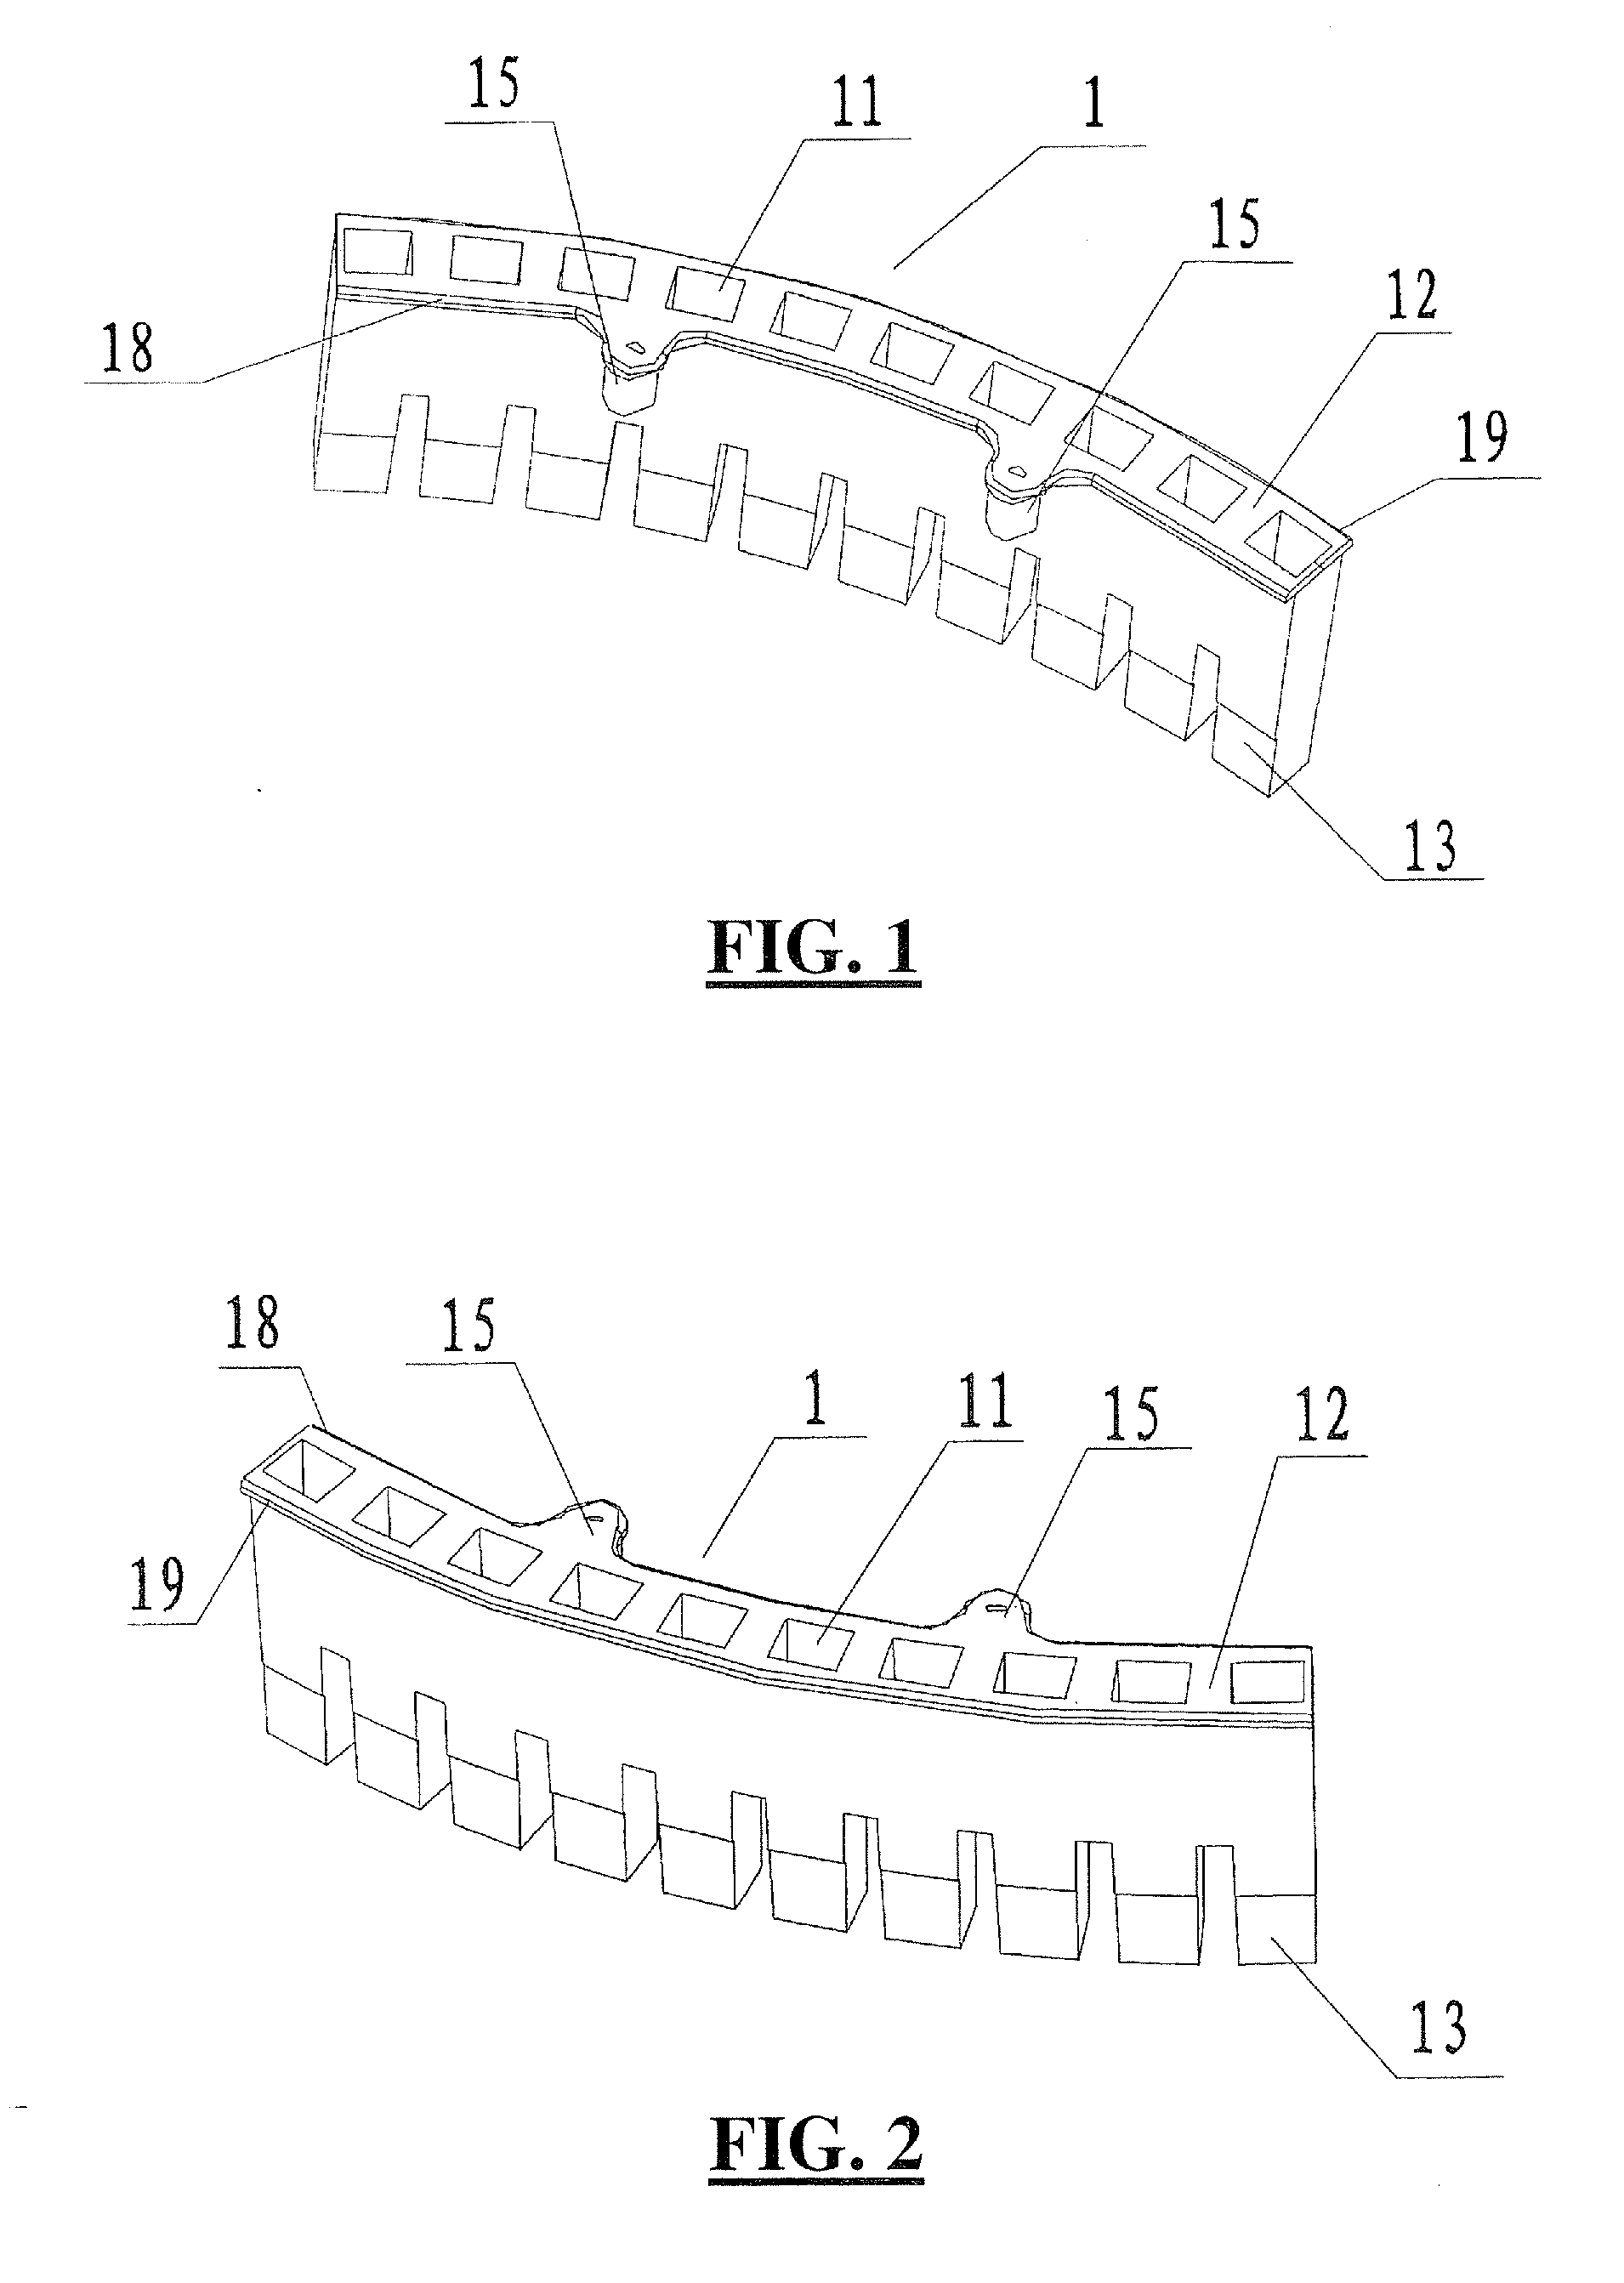 Disposable Reaction Cuvette Segment for Use in Full Automatic Chemistry Analyzers